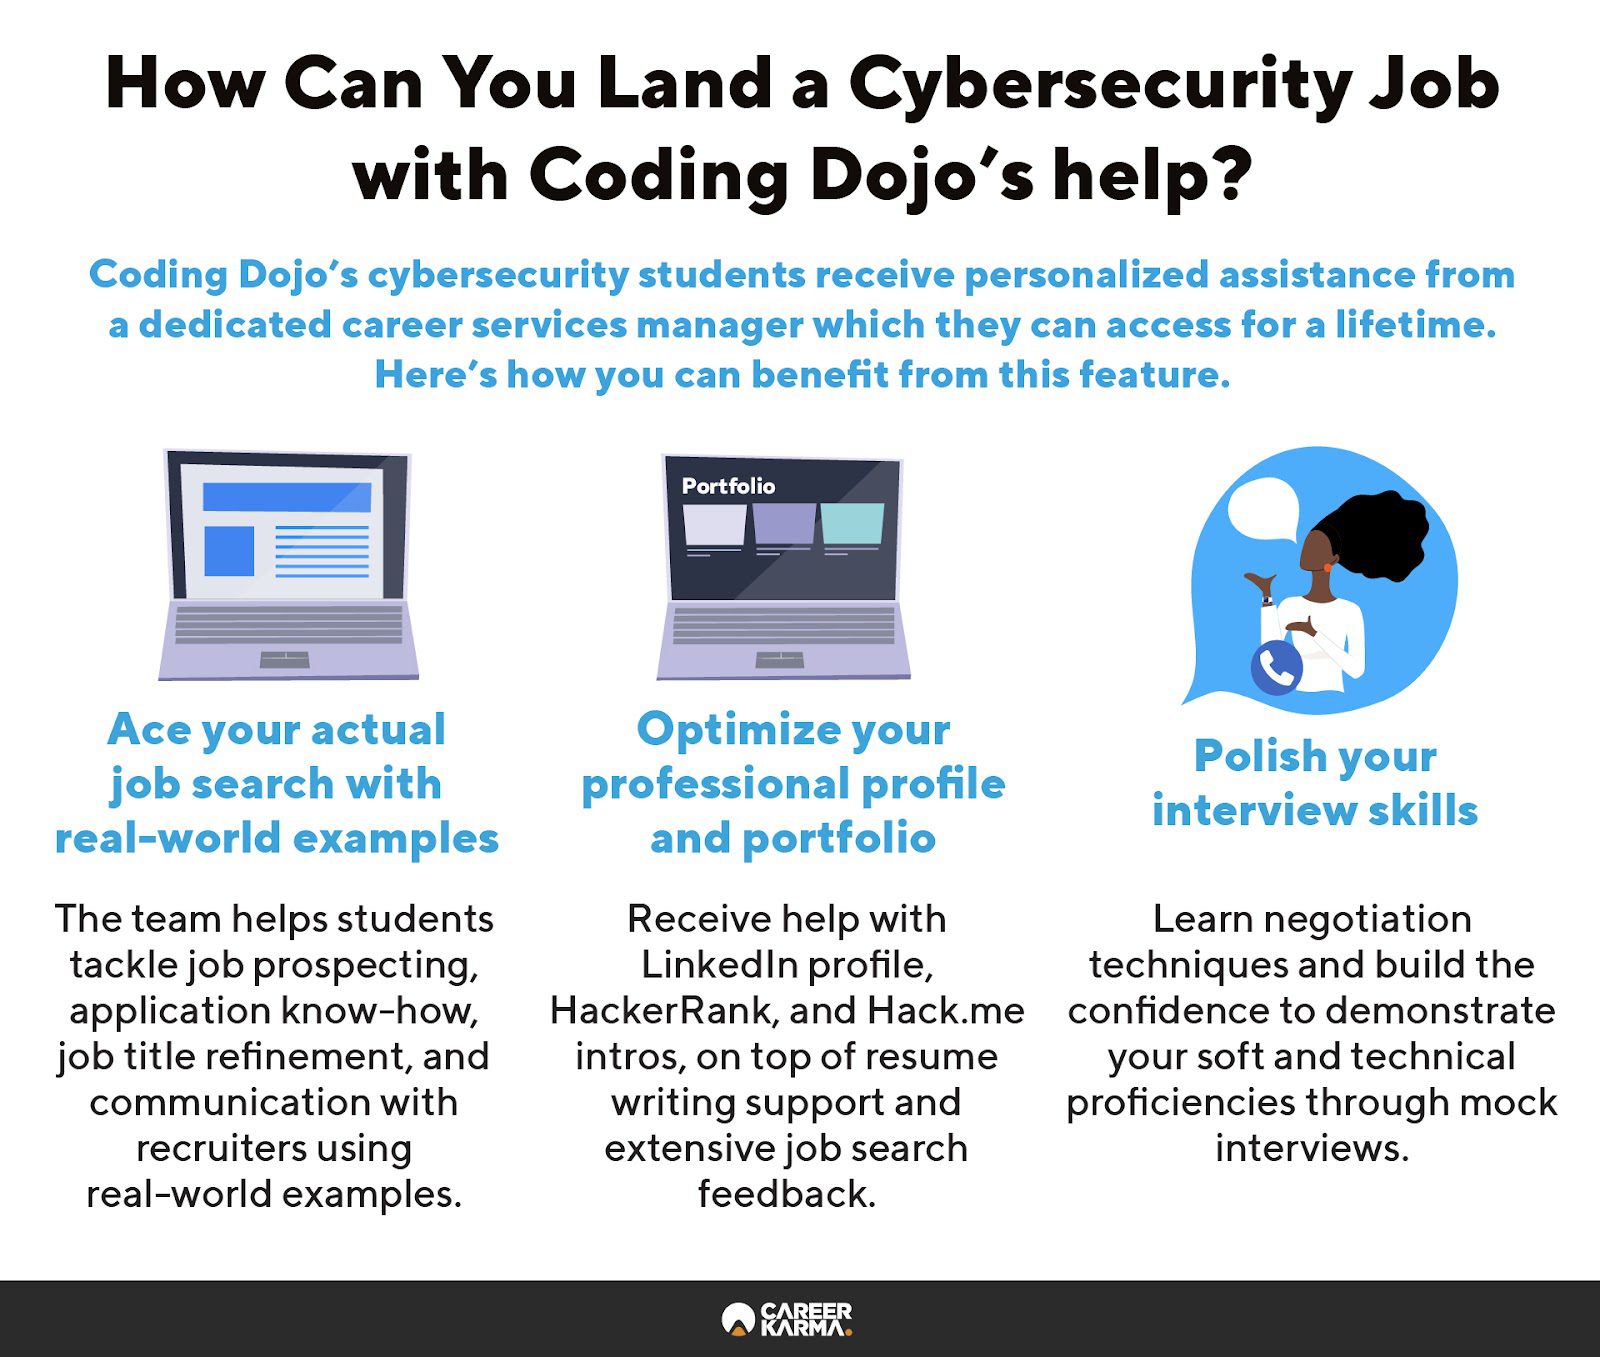 An infographic highlighting Coding Dojo’s career services